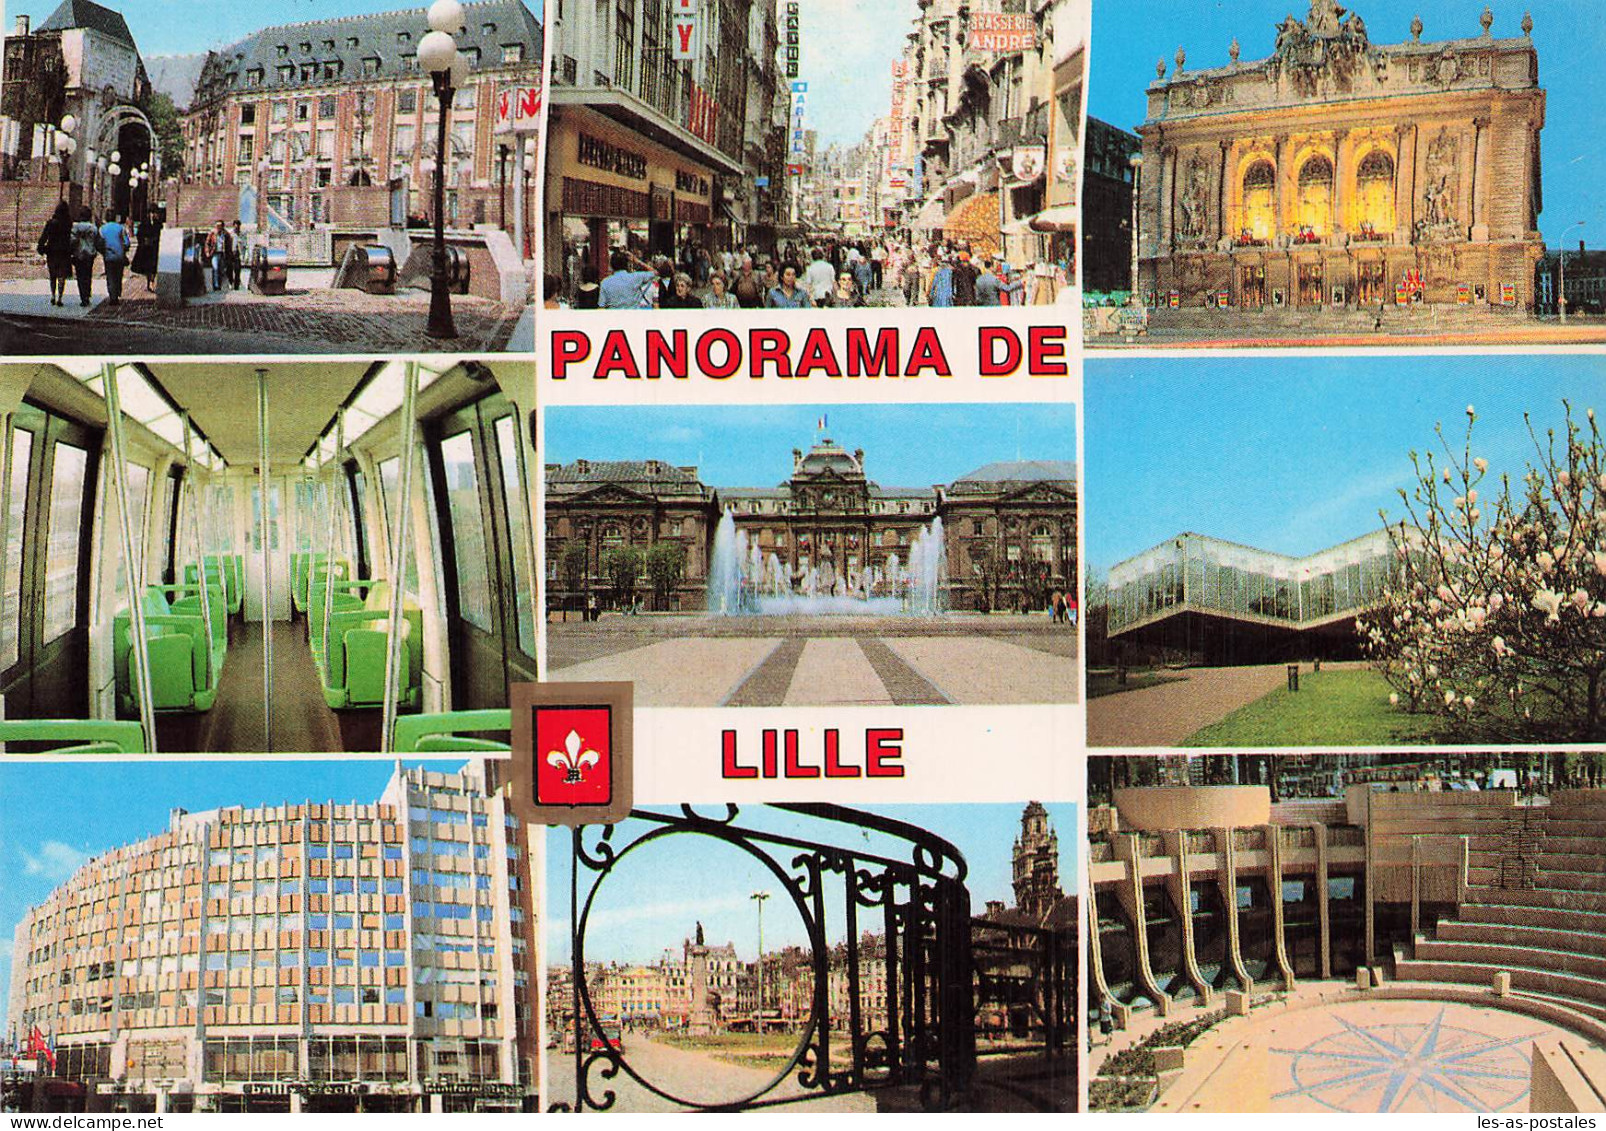 59 LILLE - Lille